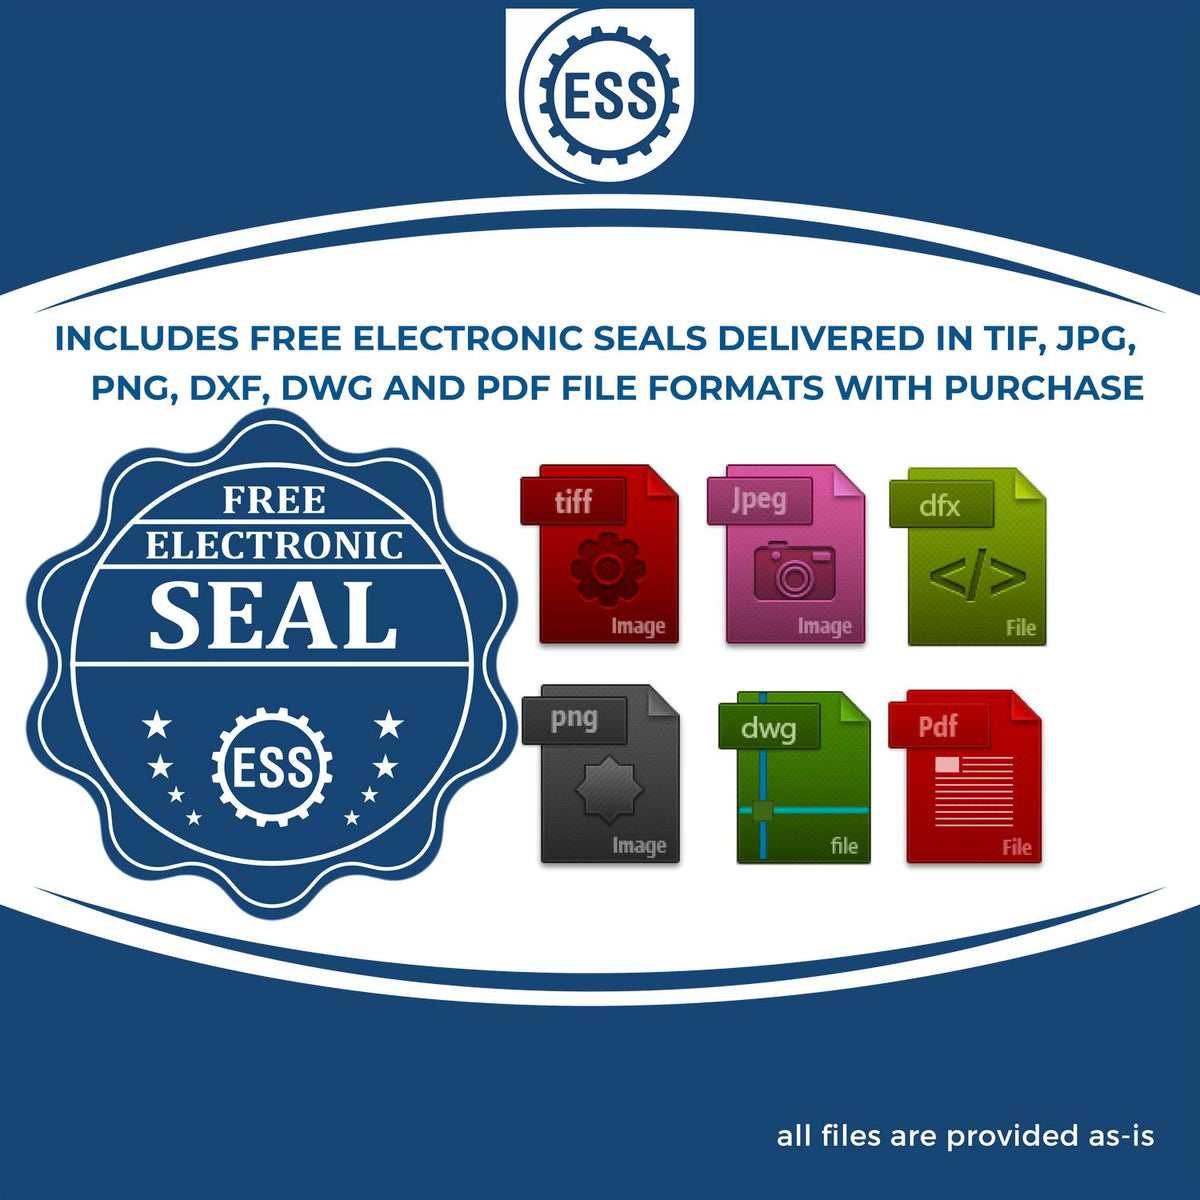 An infographic for the free electronic seal for the Long Reach California PE Seal illustrating the different file type icons such as DXF, DWG, TIF, JPG and PNG.